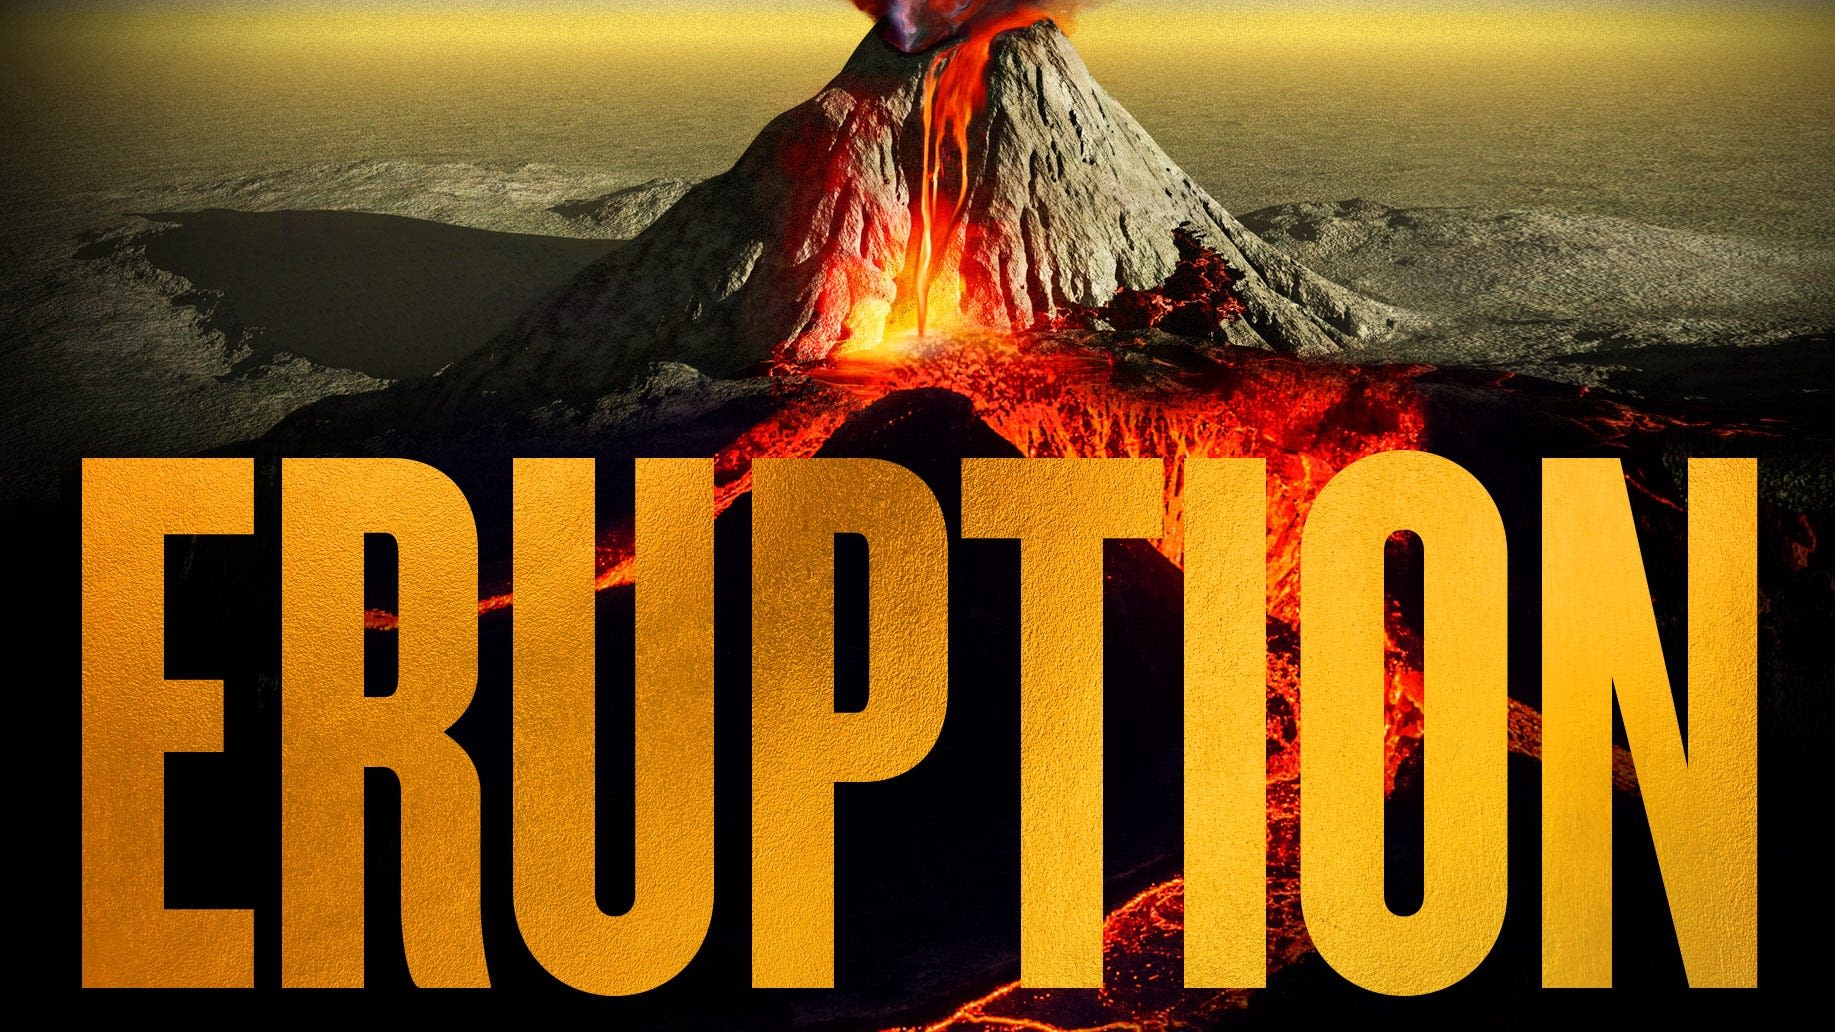 This is why widow of Michael Crichton chose James Patterson to finish his 'Eruption' book